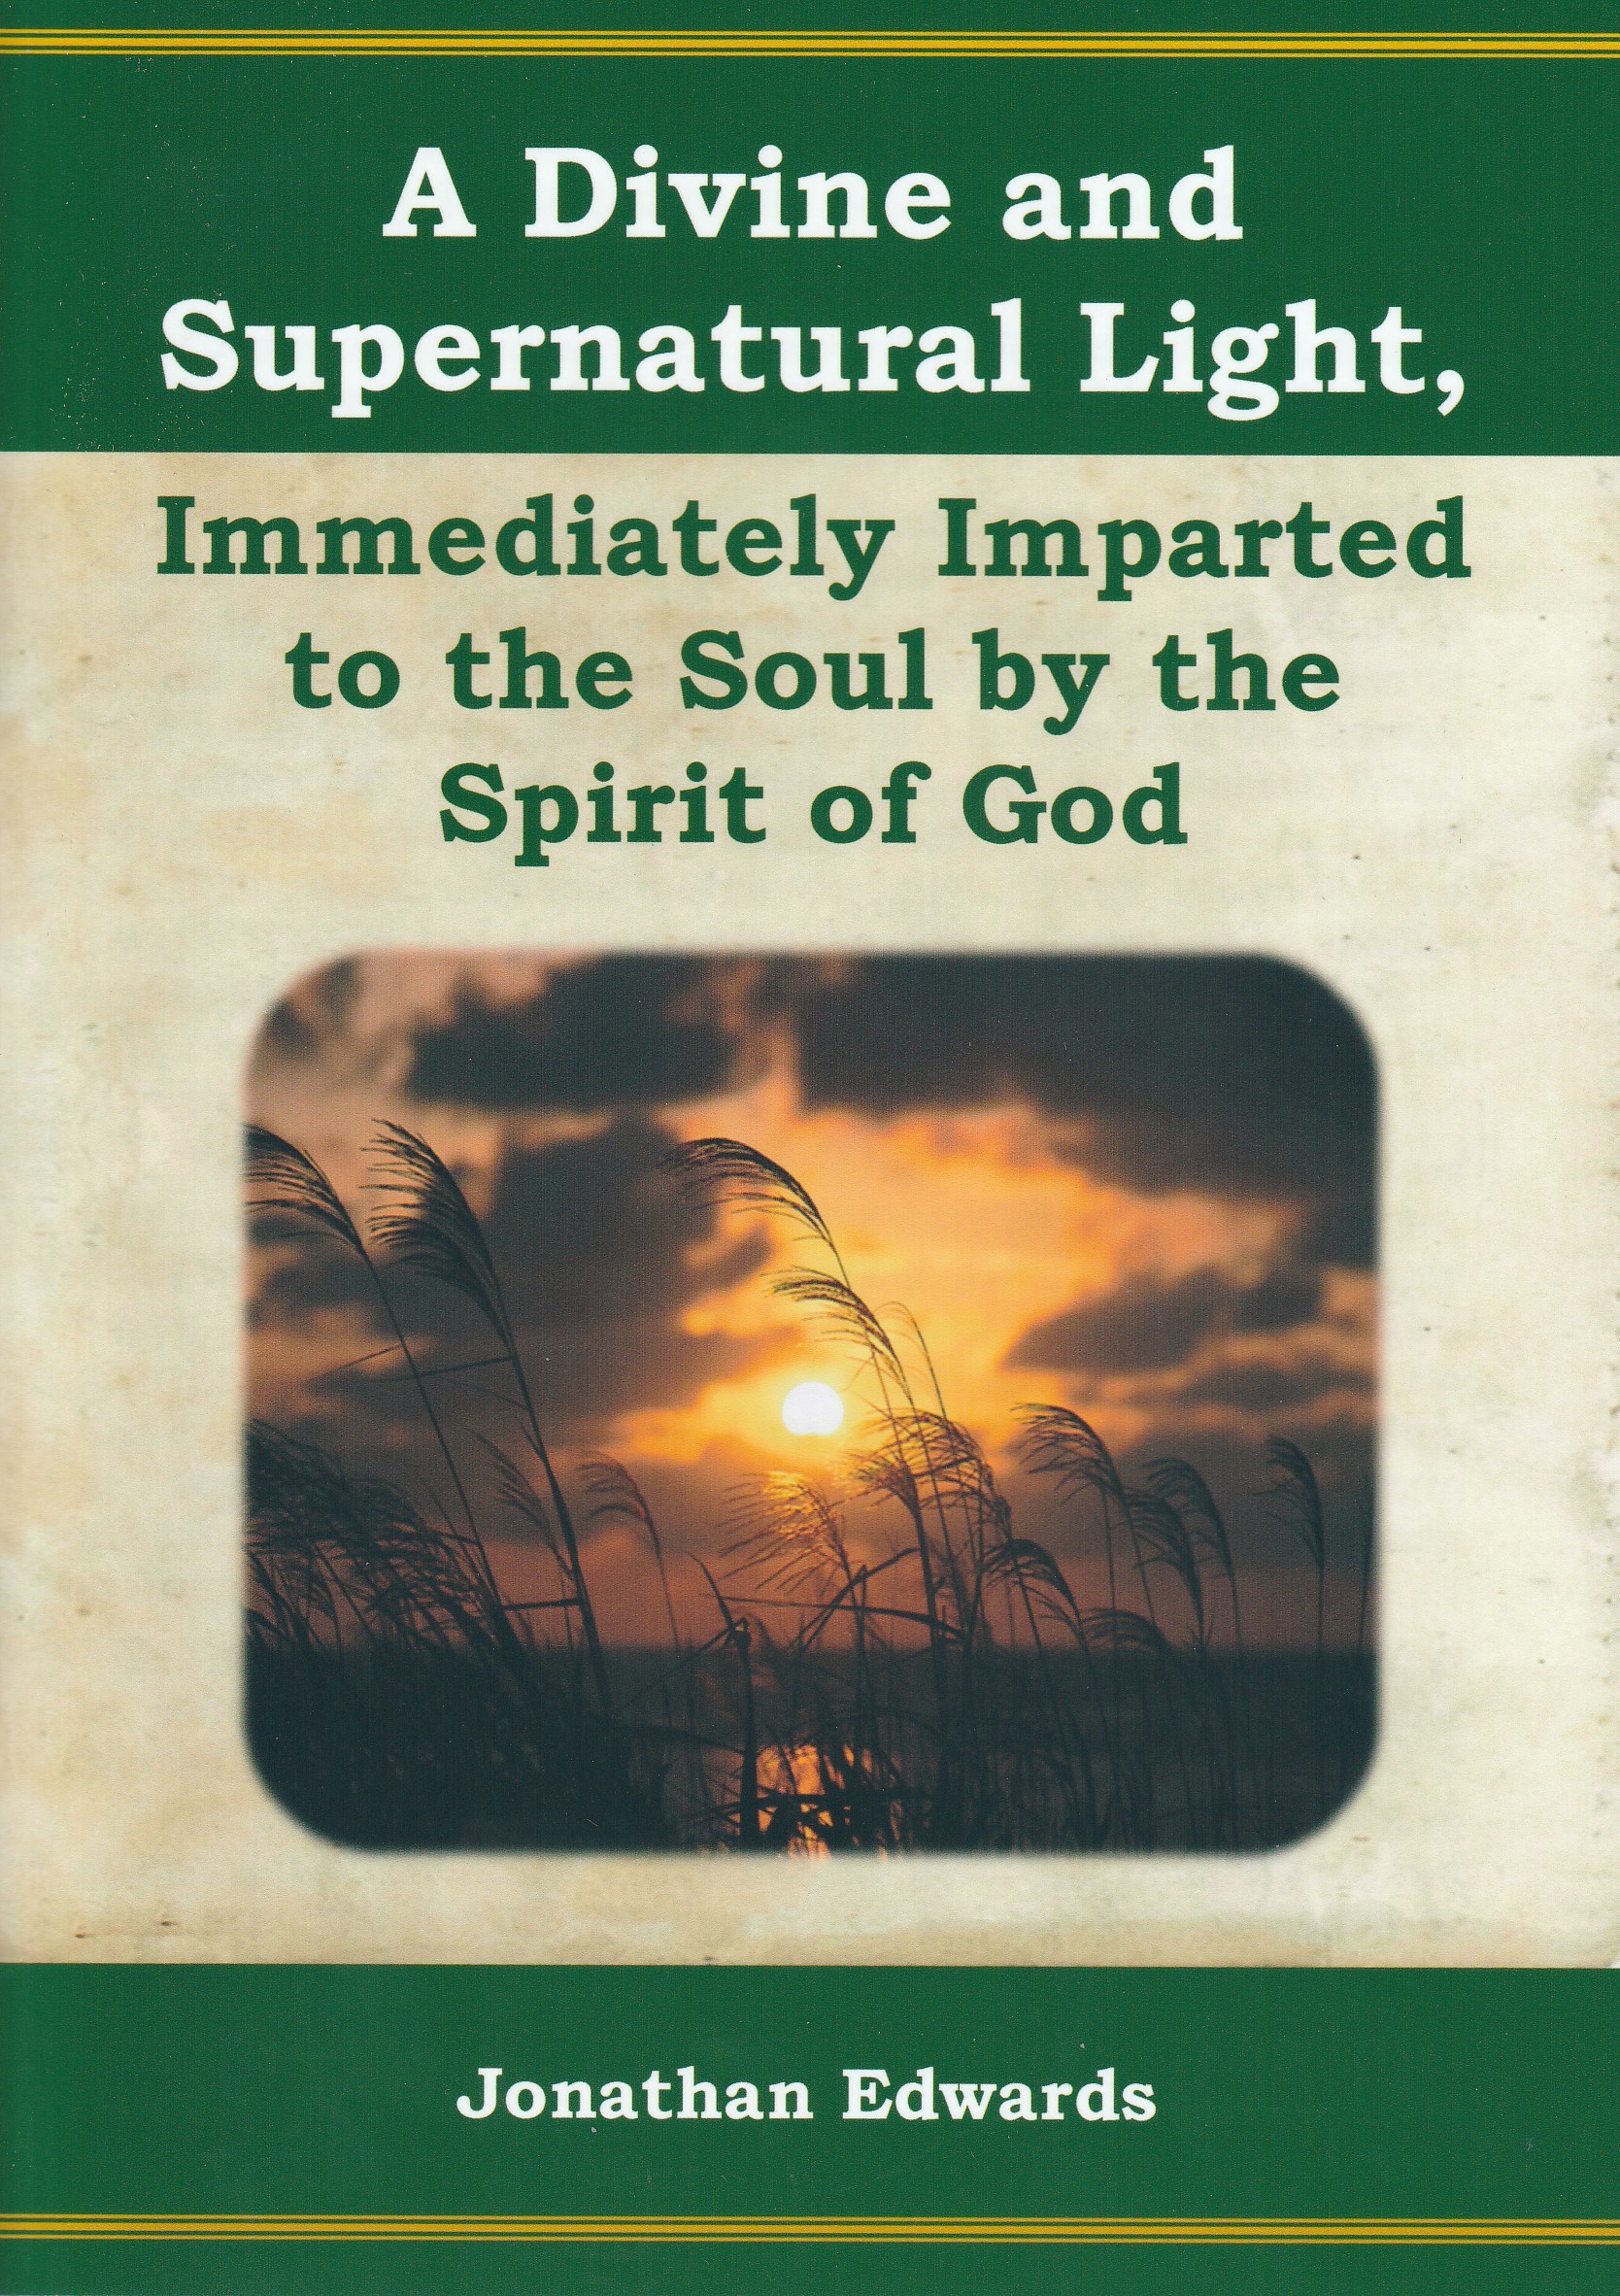 A Divine and Supernatural Light, Immediately Imparted to the Soul by the Spirit of God